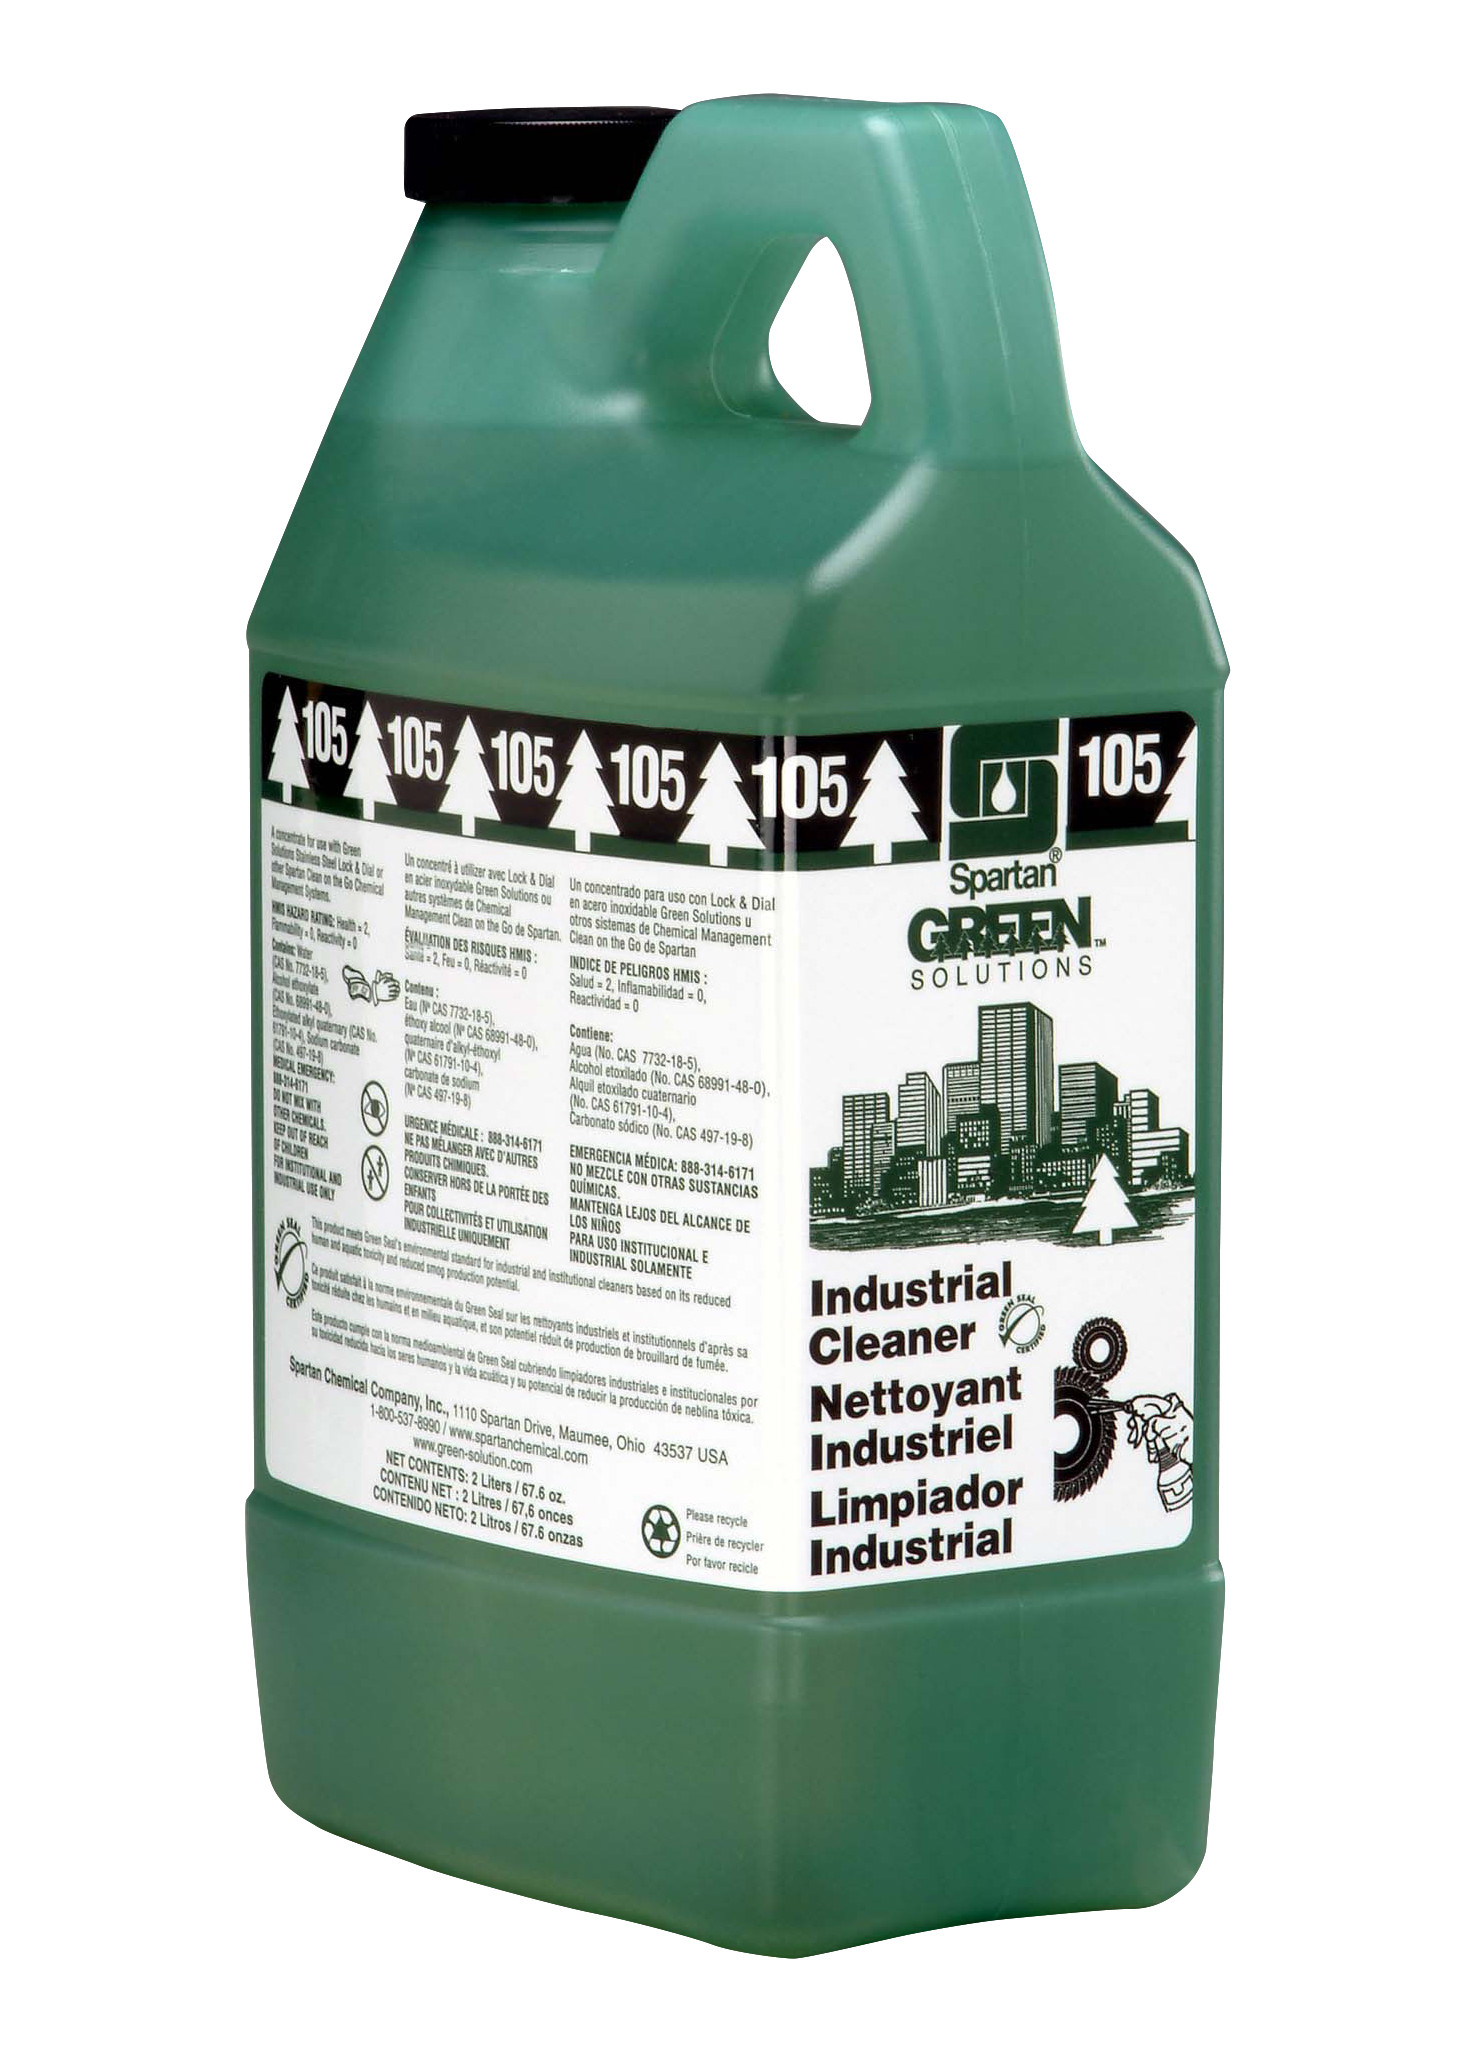 Spartan Chemical Company Green Solutions Industrial Cleaner 105, 2 LITER 4/CS